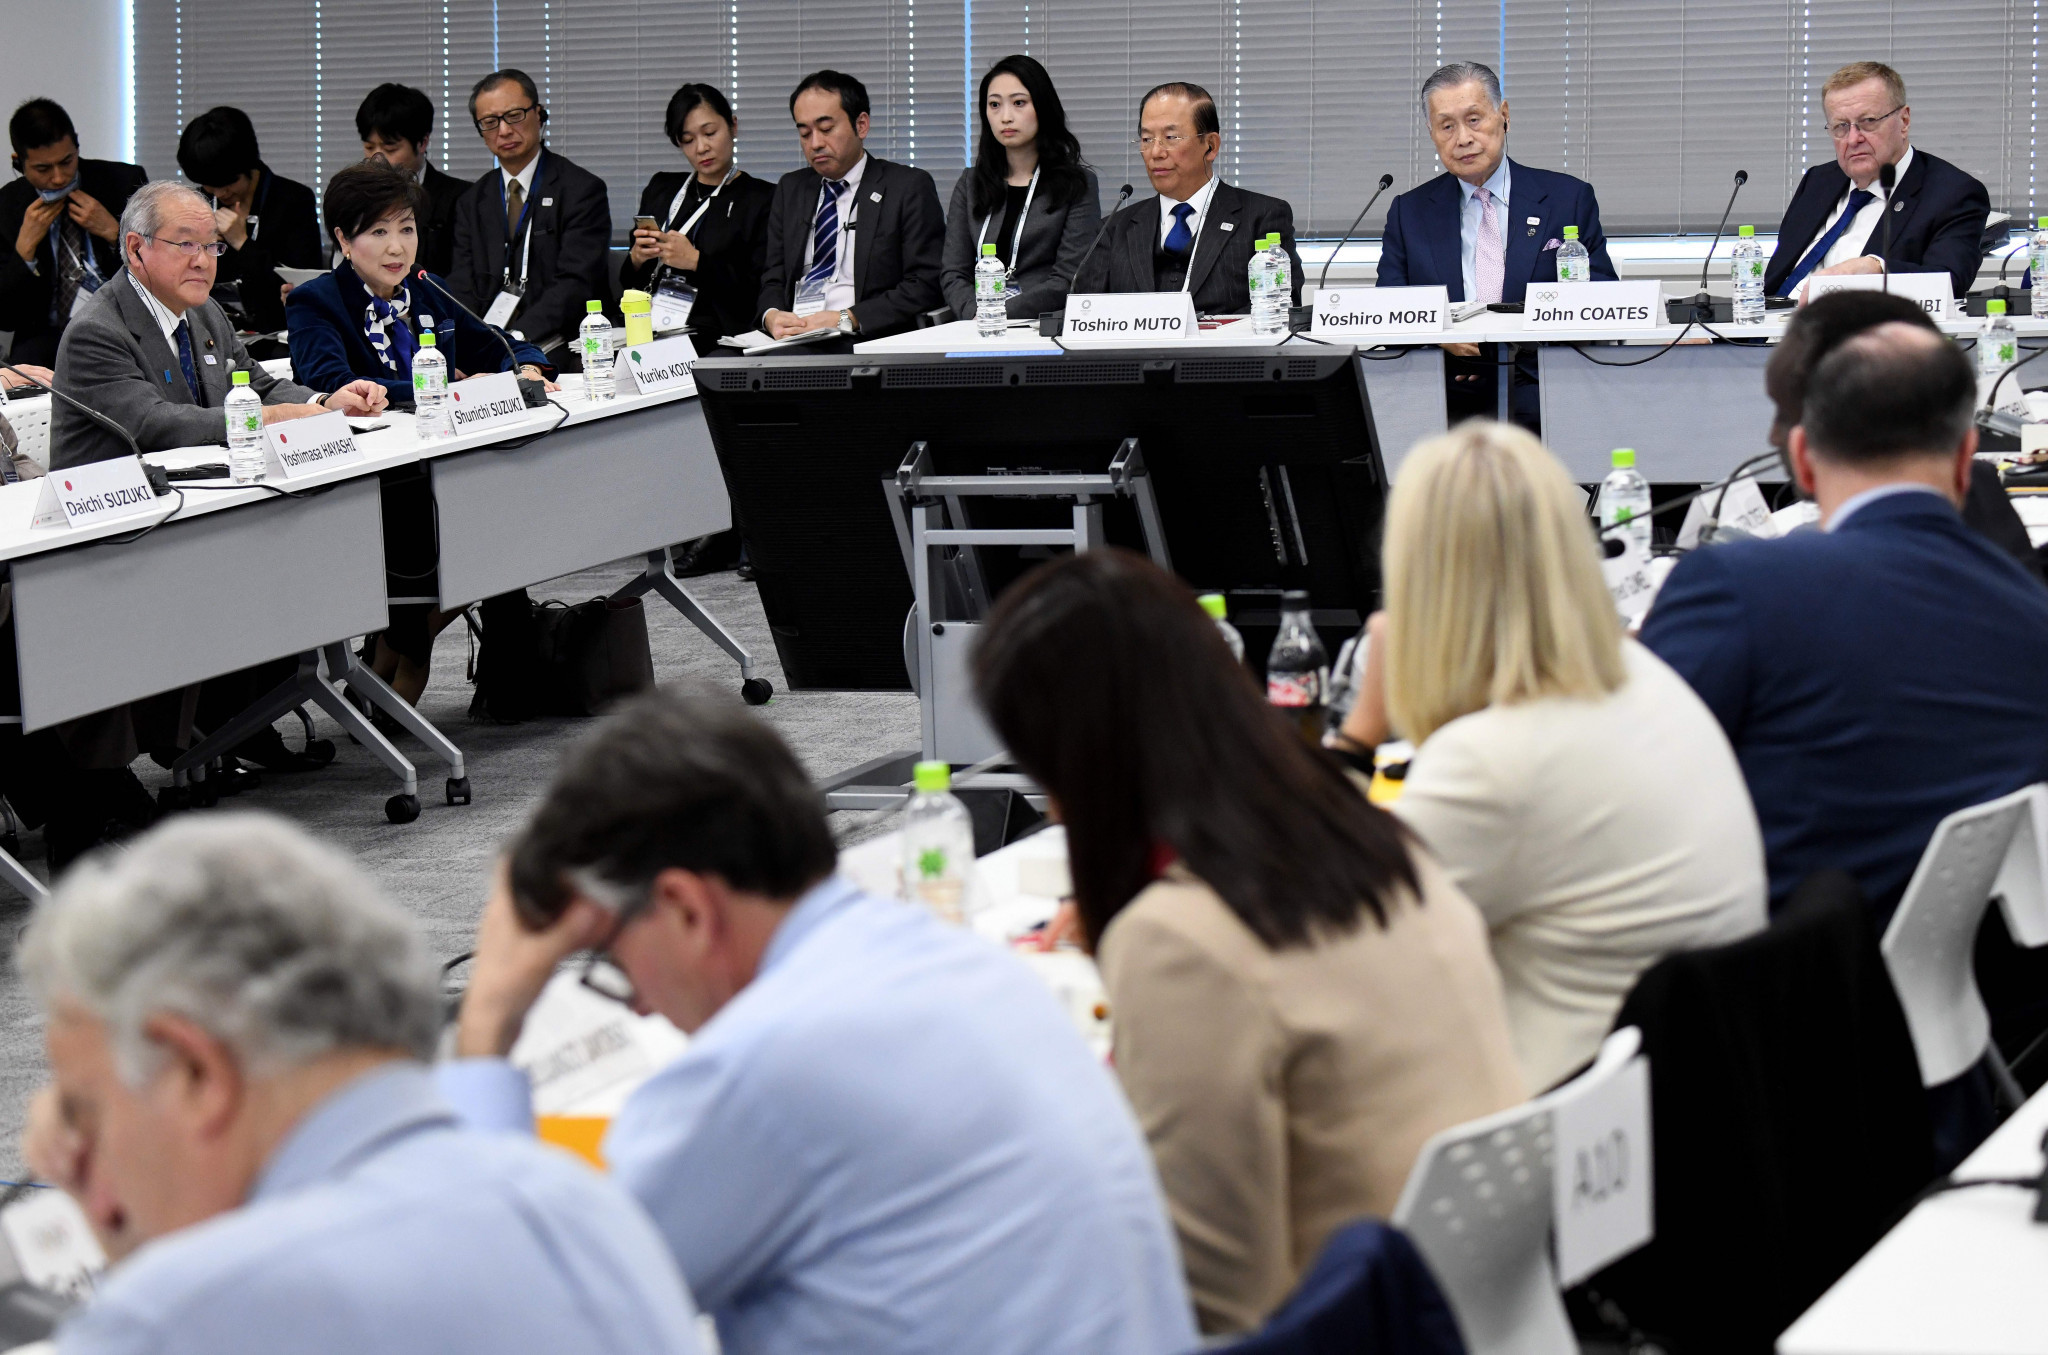 Takashi Yamamoto was introduced to the IOC Coordination Commission yesterday ©Getty Images